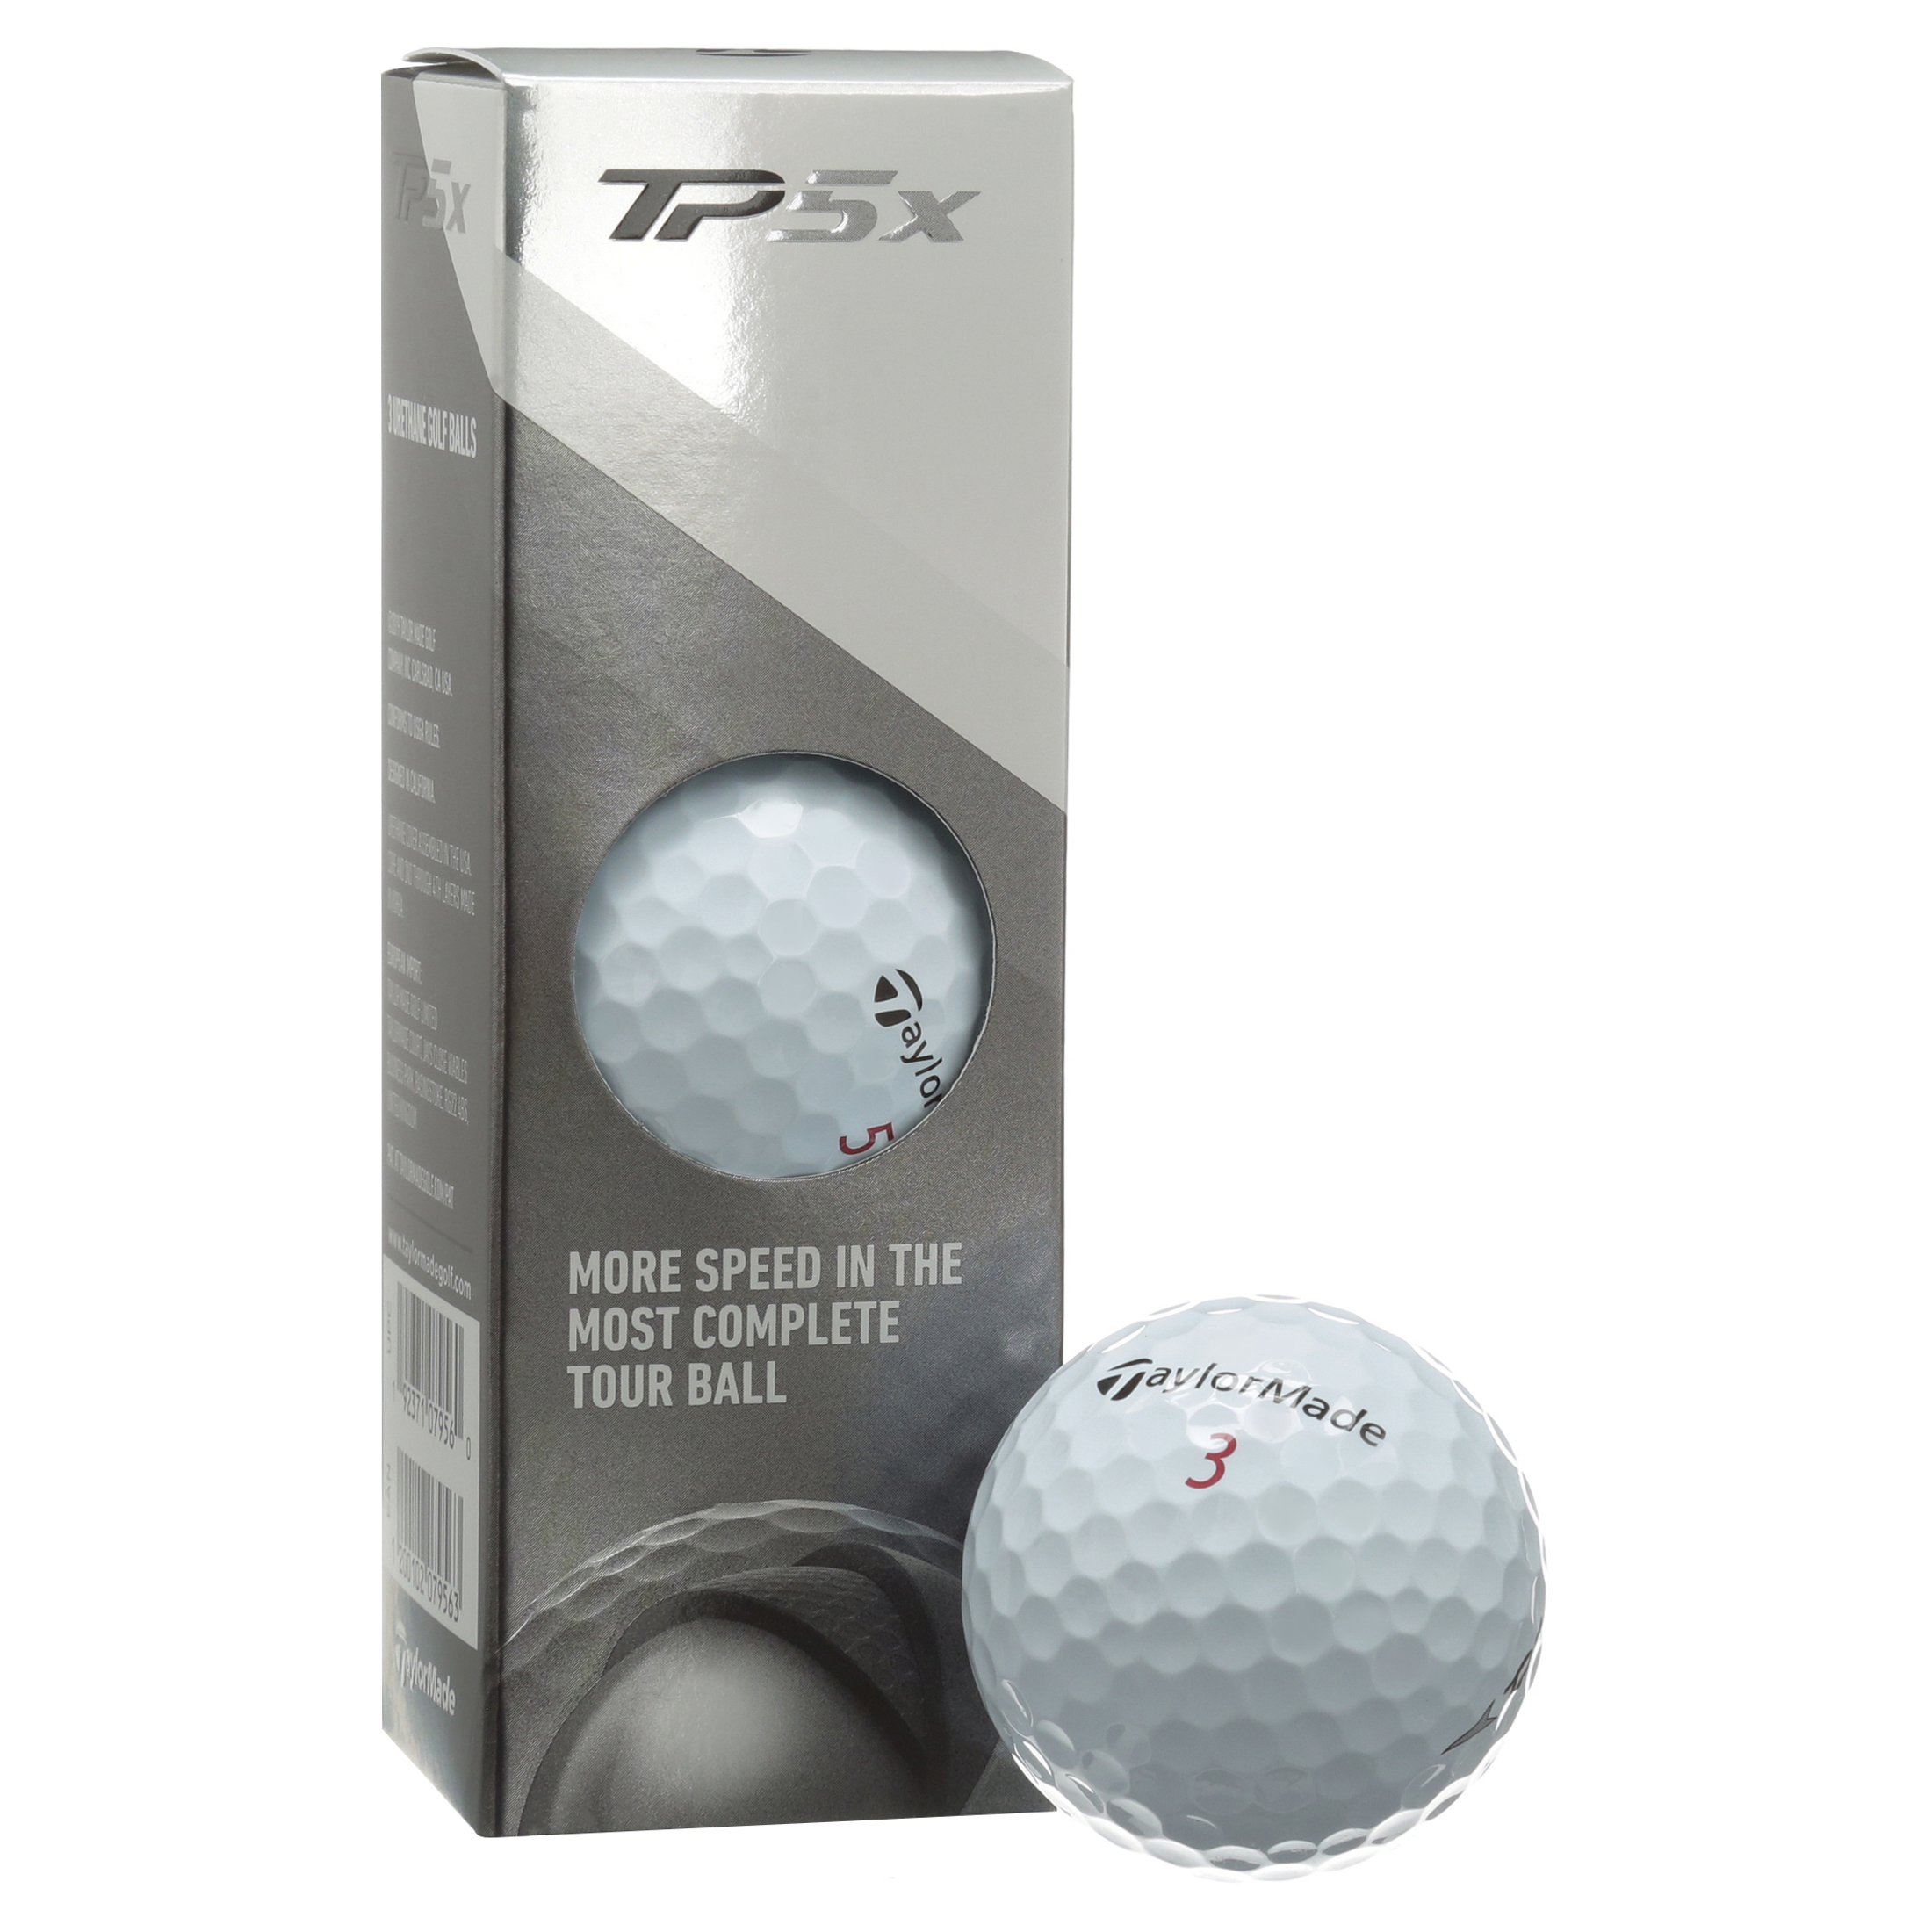 TaylorMade TP5x Golf Balls, 12 Pack - image 7 of 7